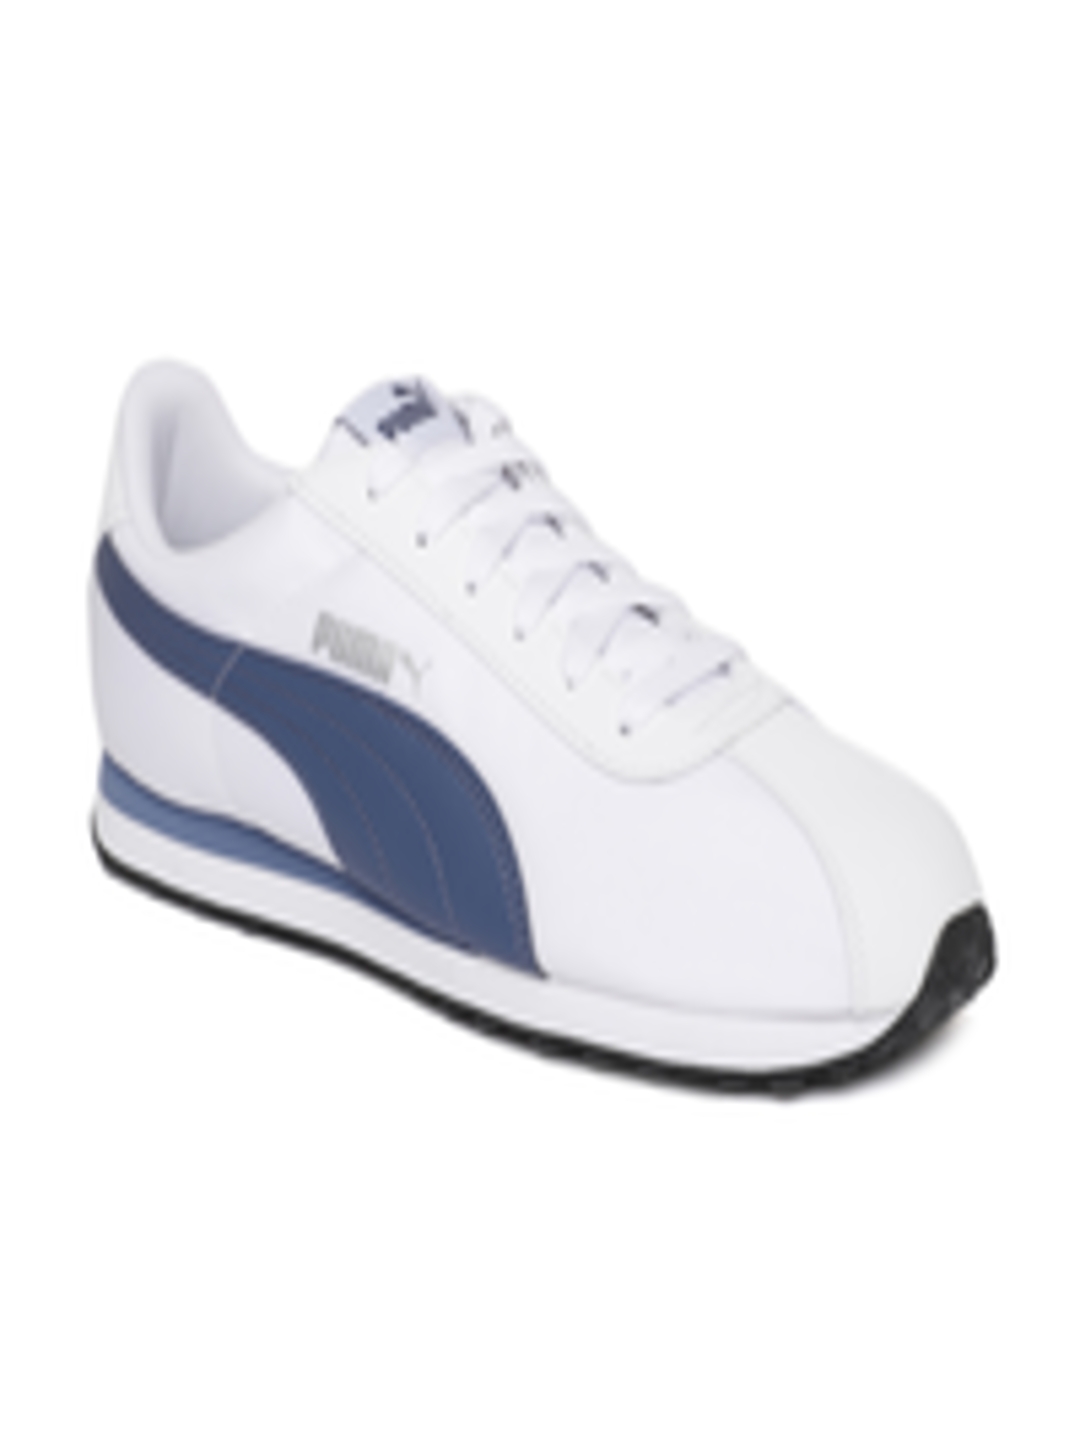 Buy Puma Men White Sneakers - Casual Shoes for Men 6739125 | Myntra